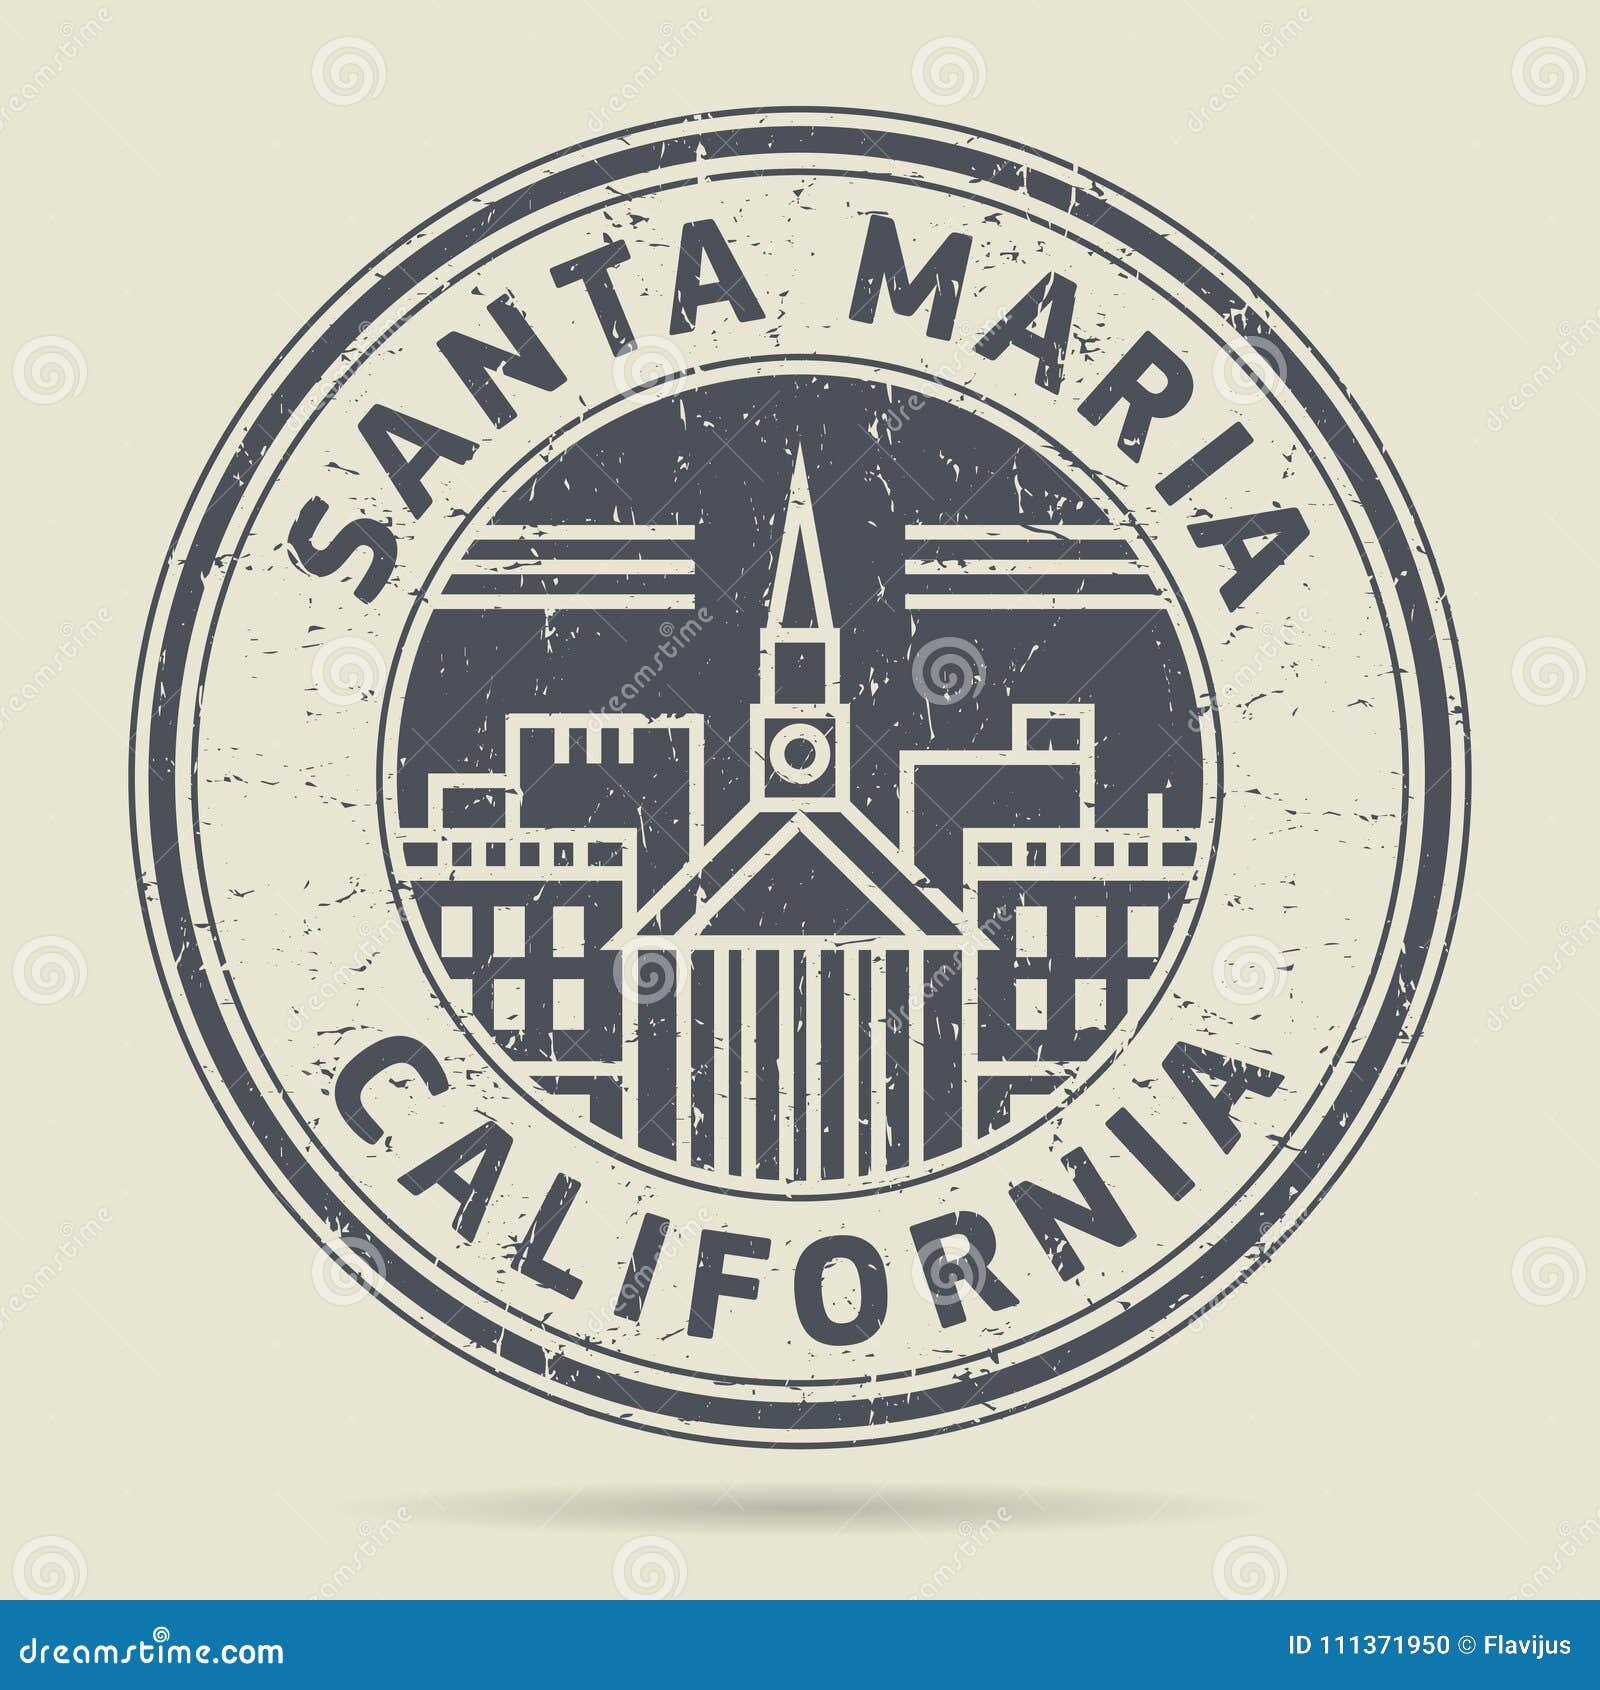 grunge rubber stamp or label with text santa maria, california